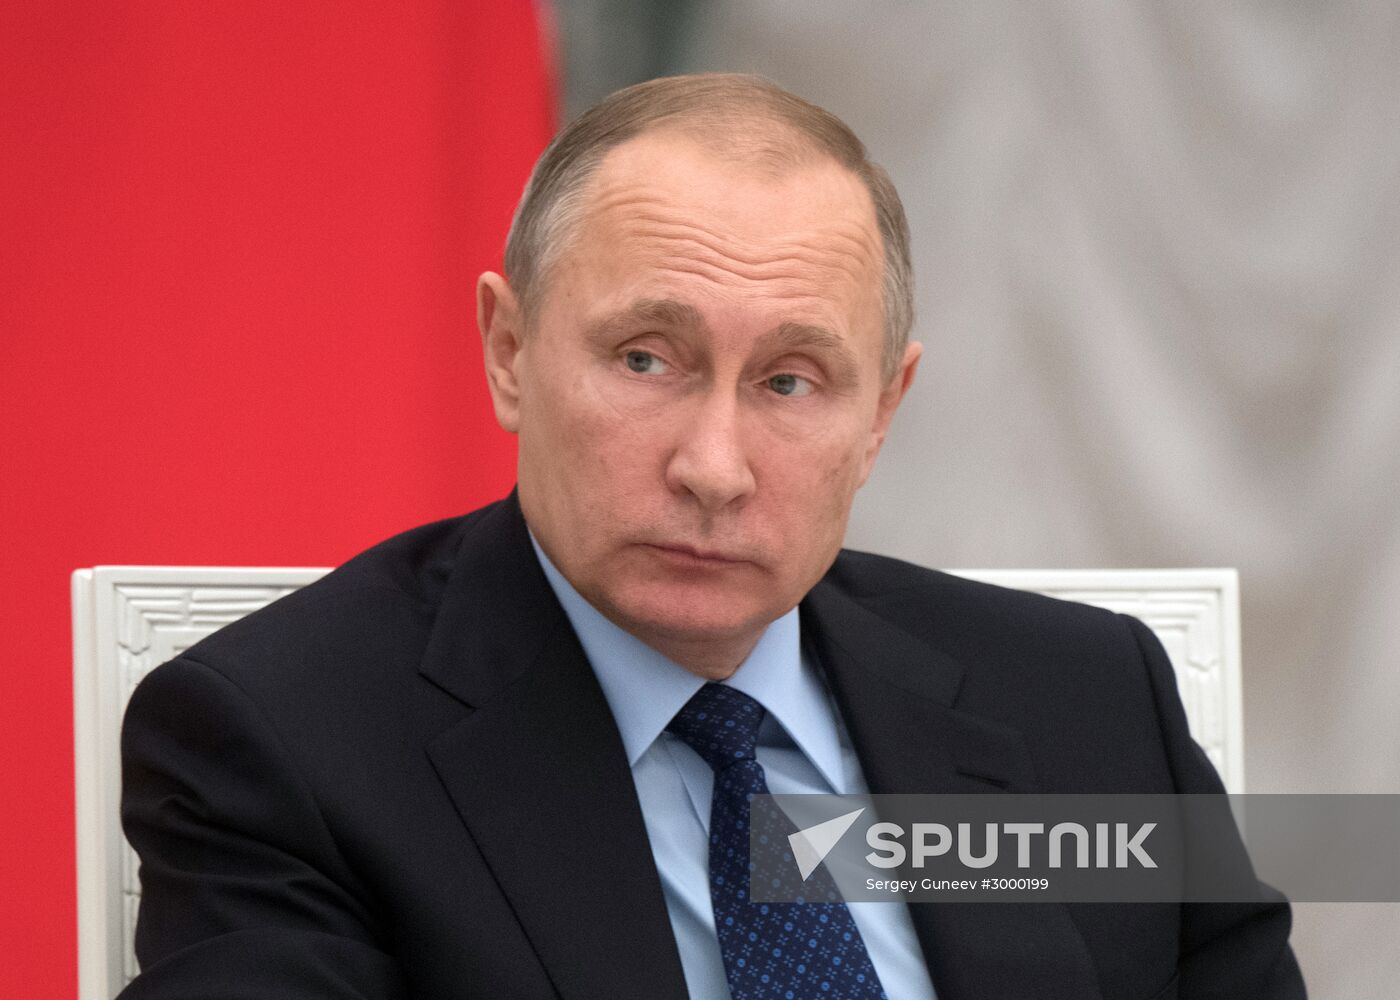 Vladimir Putin meets with Russian Federation Council and State Duma top officials